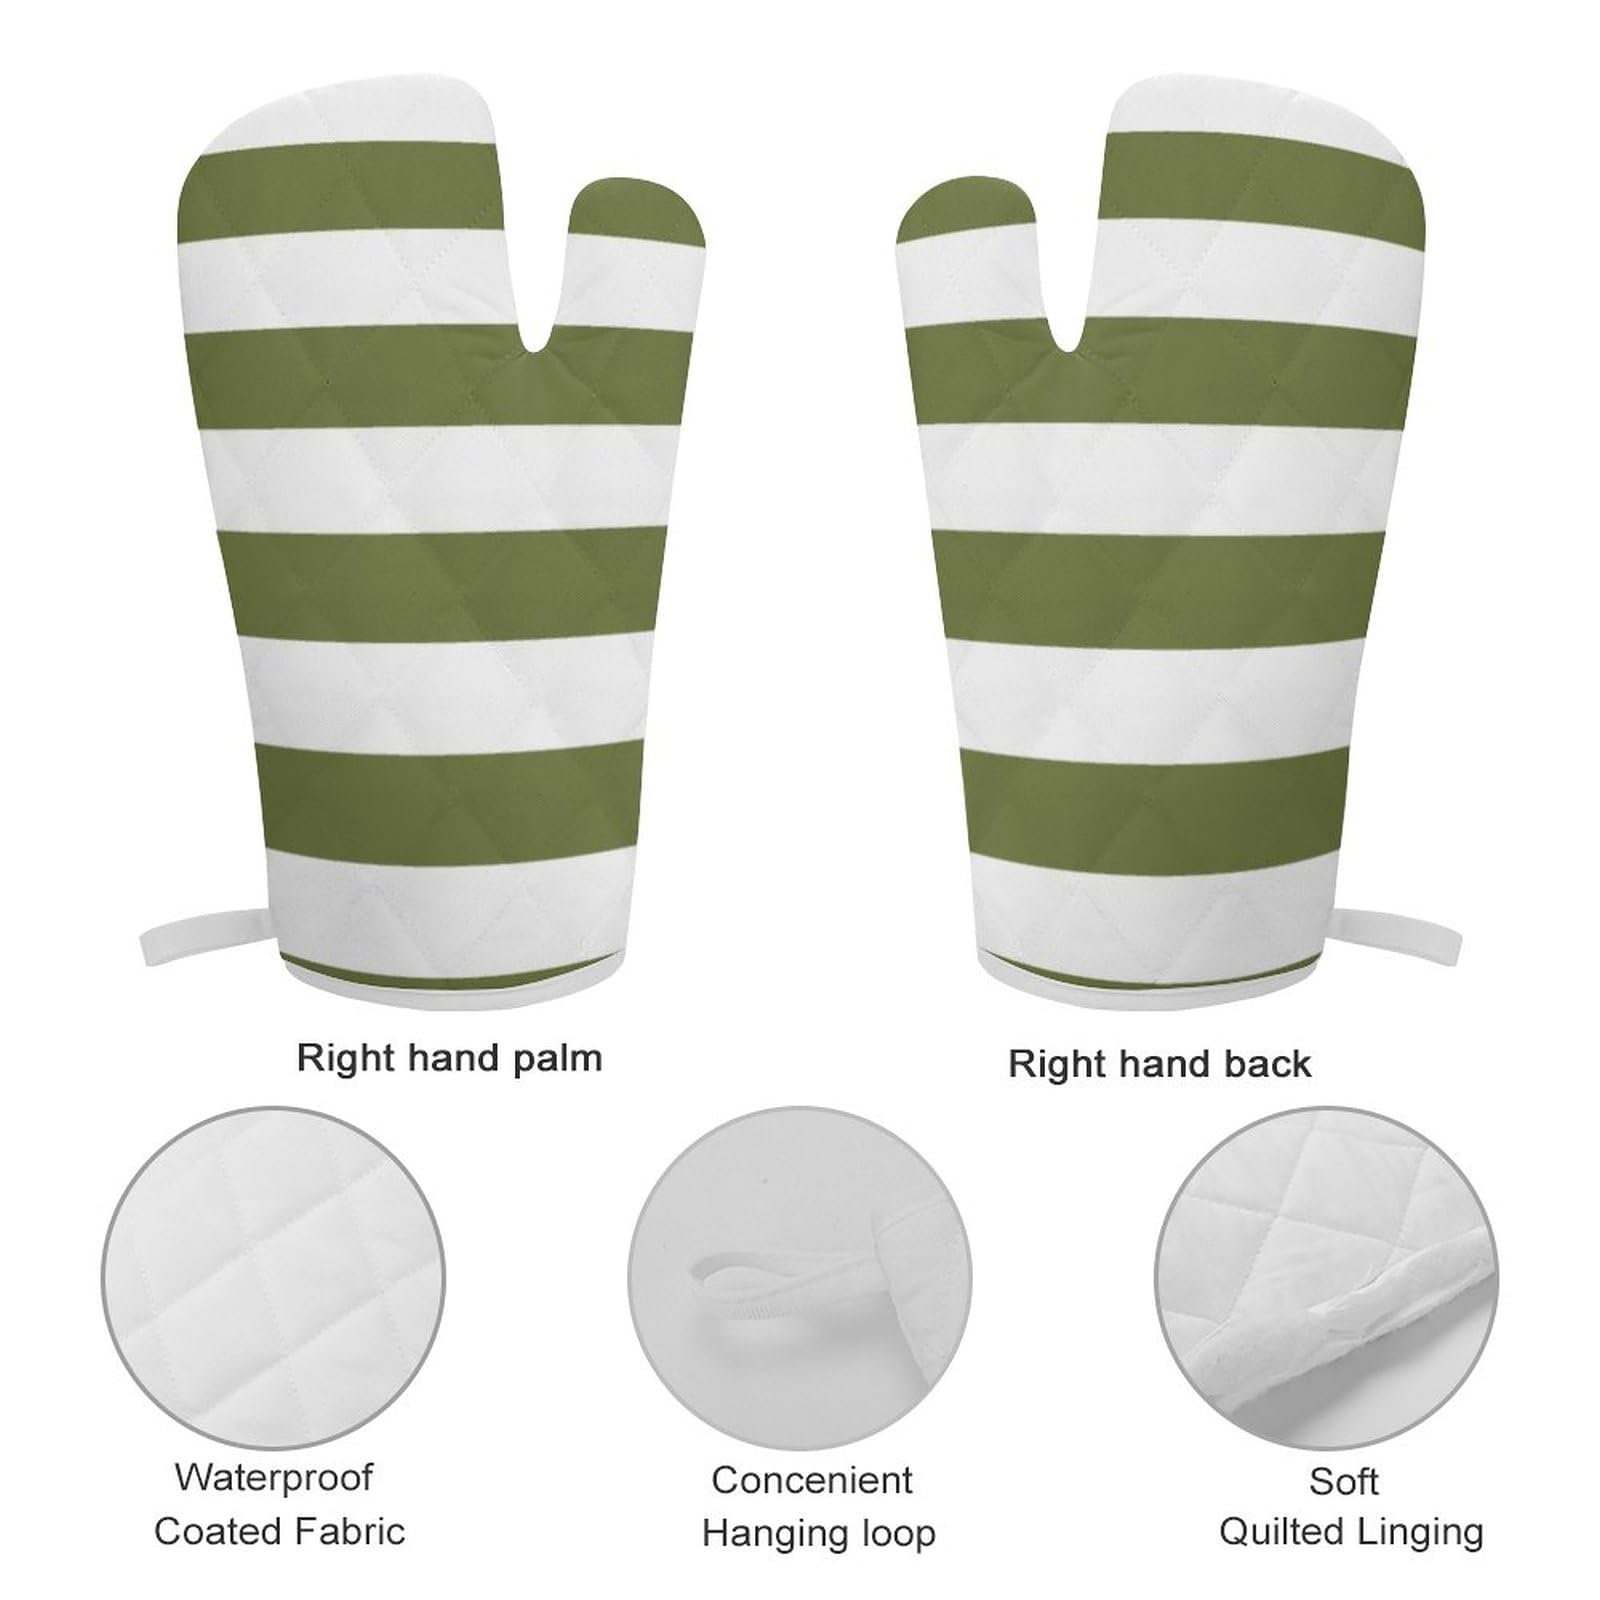 2Pcs Oven Mitts and Pot Holders Set, Olive Green and White Stripes Oven Mitts Gloves Set Heat Resistant Hot Pads for Kitchen Cooking Grill